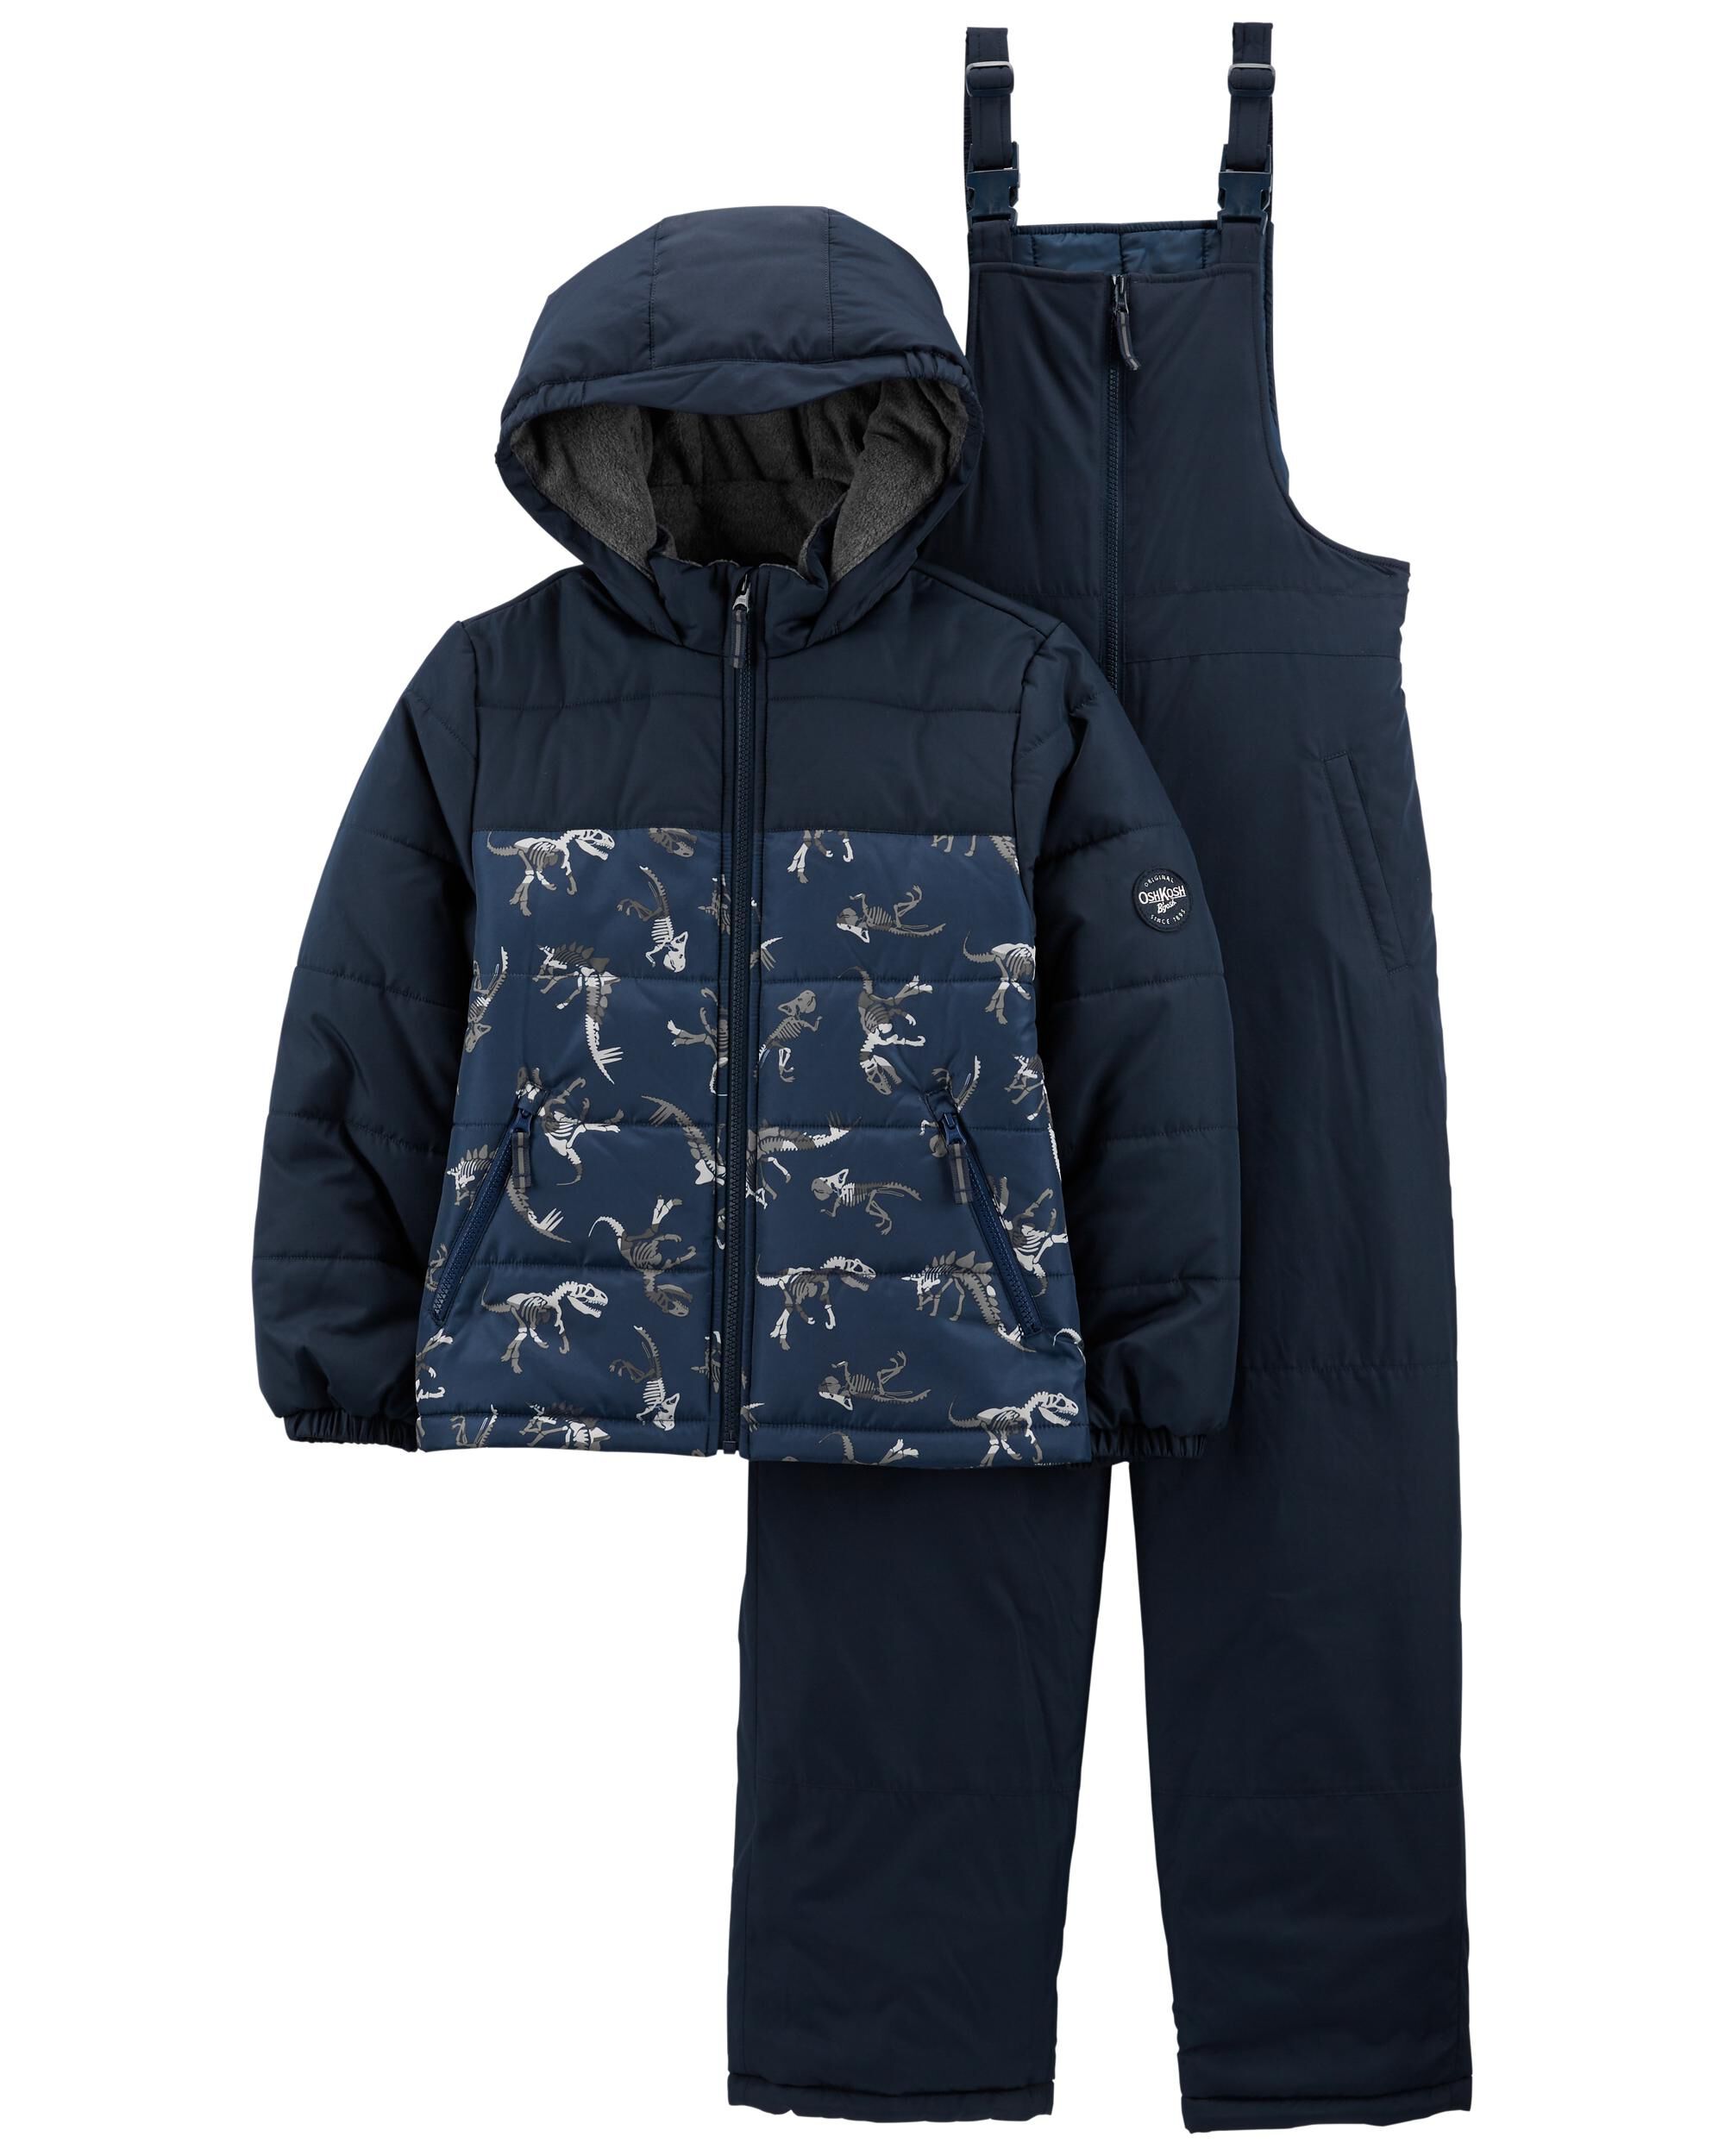 snowsuit for 2 year old boy